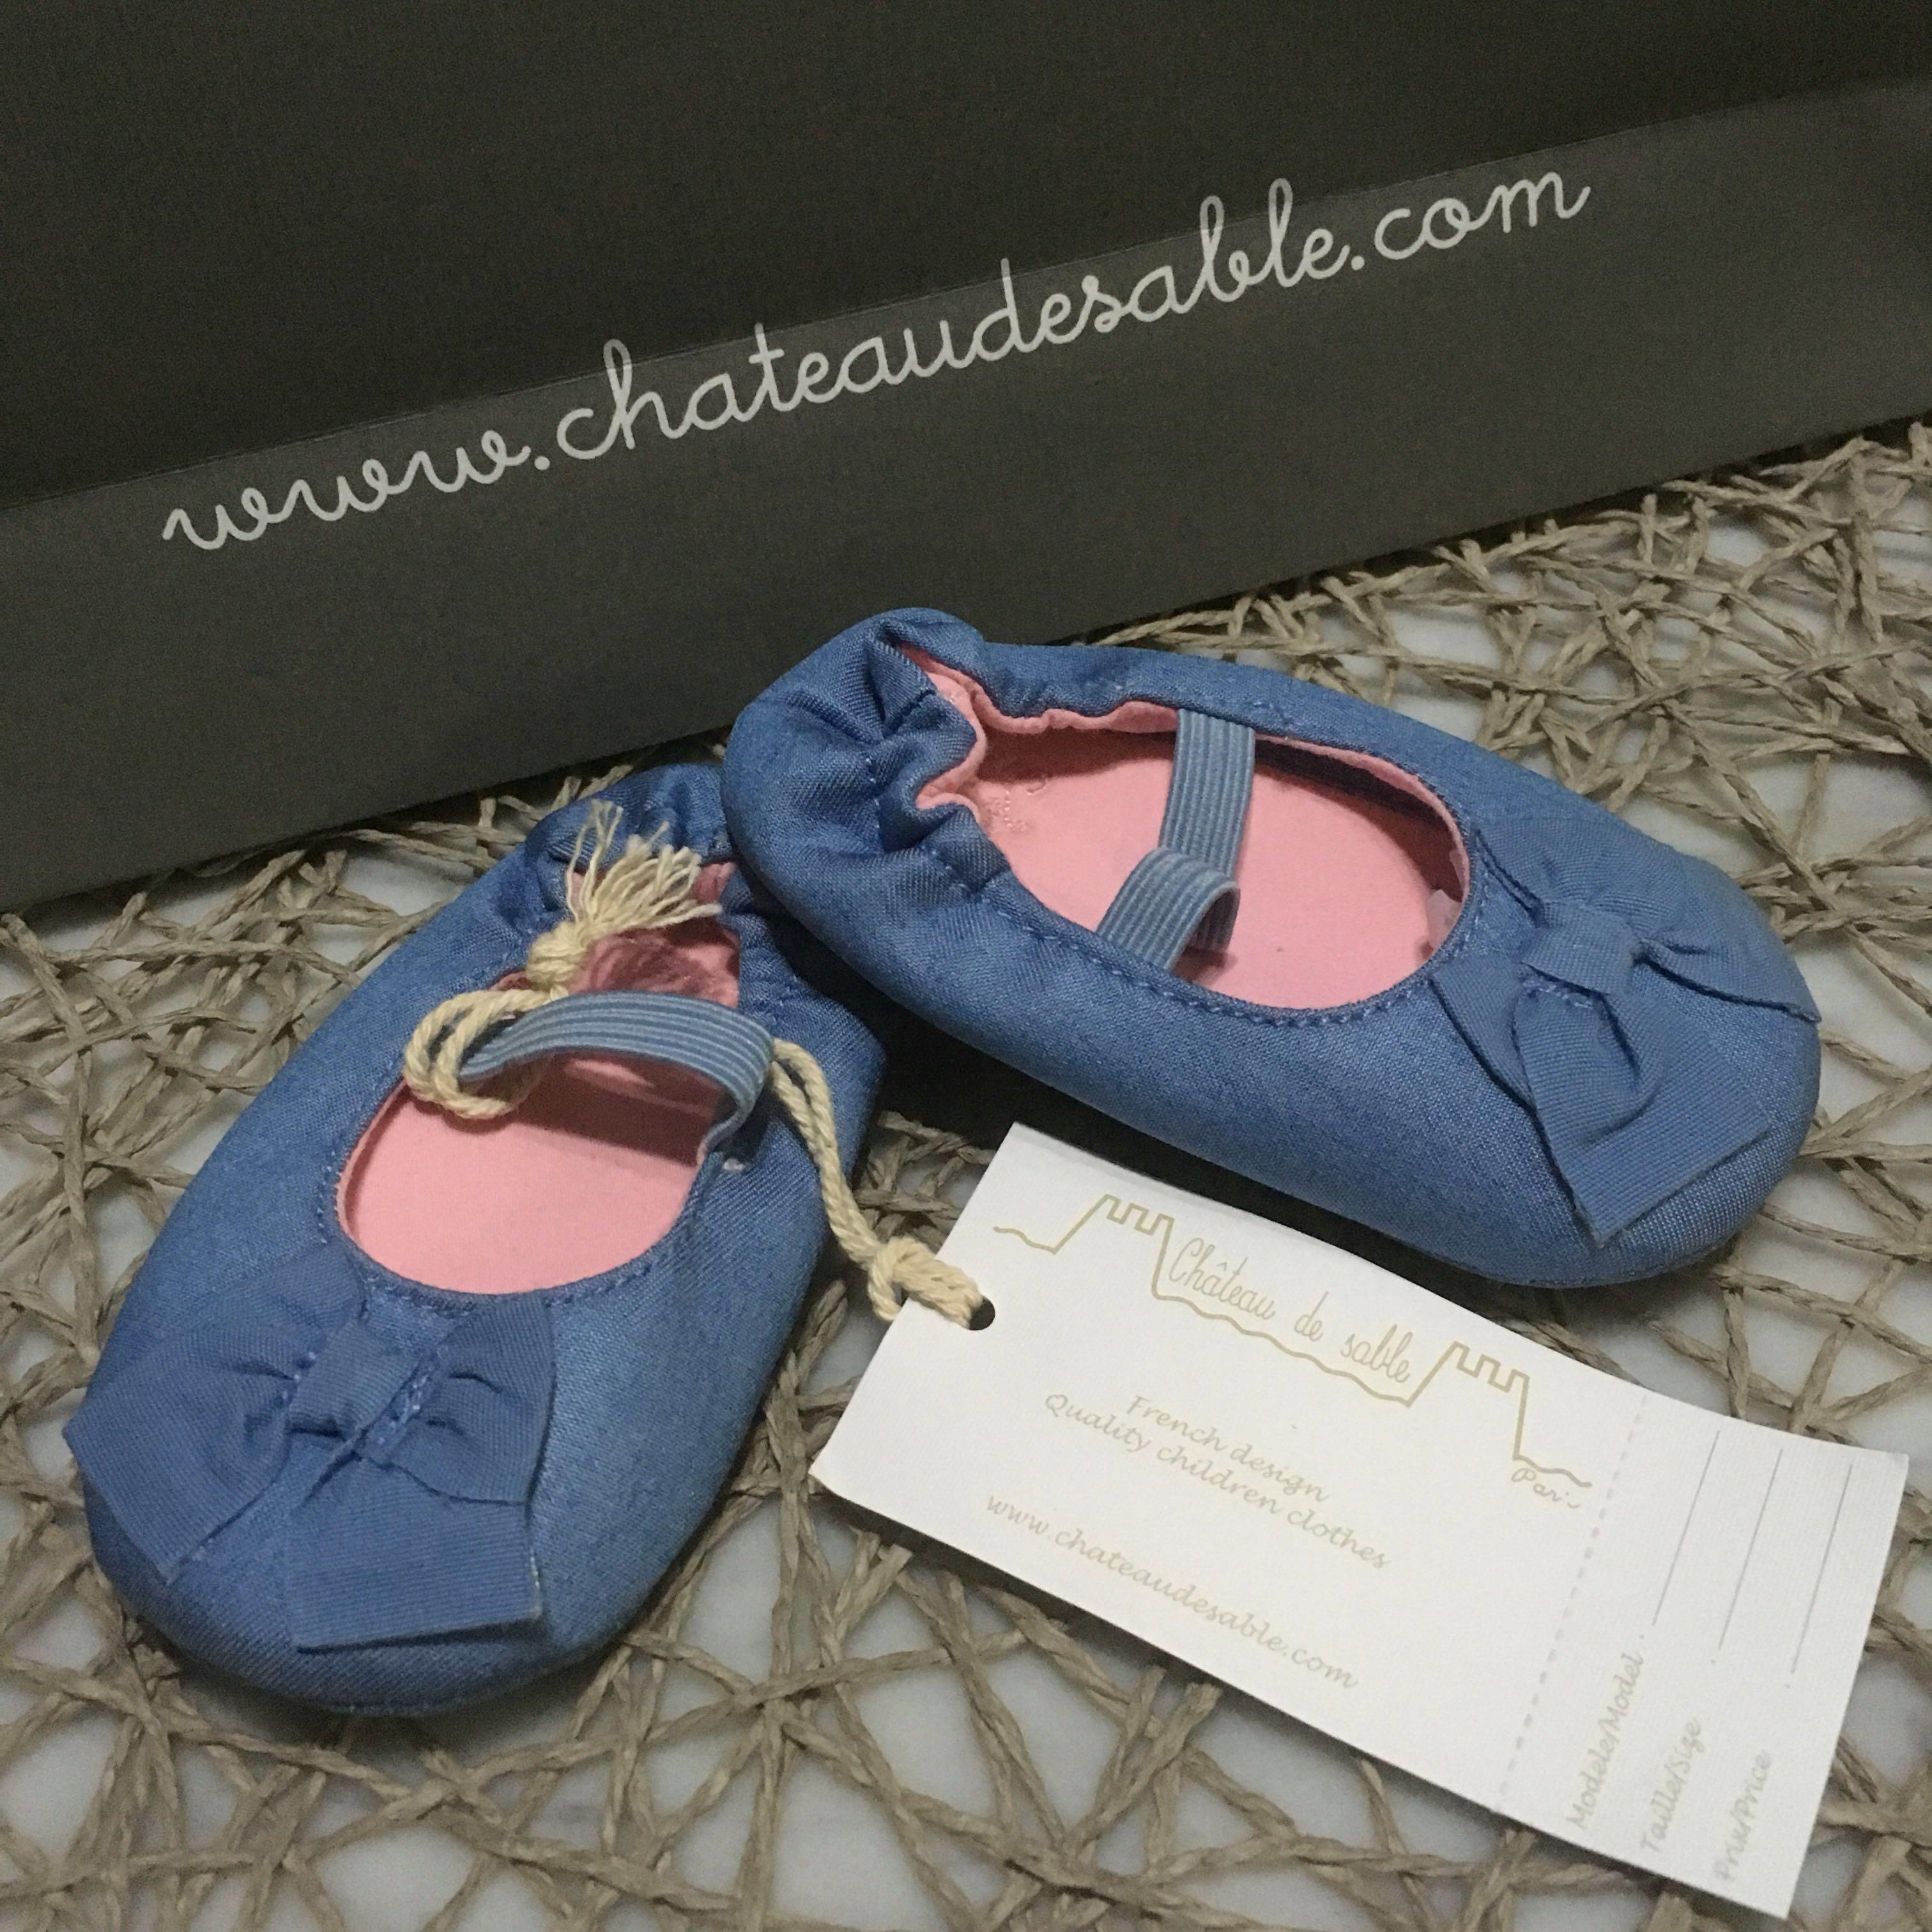 size 3 shoes for baby girl